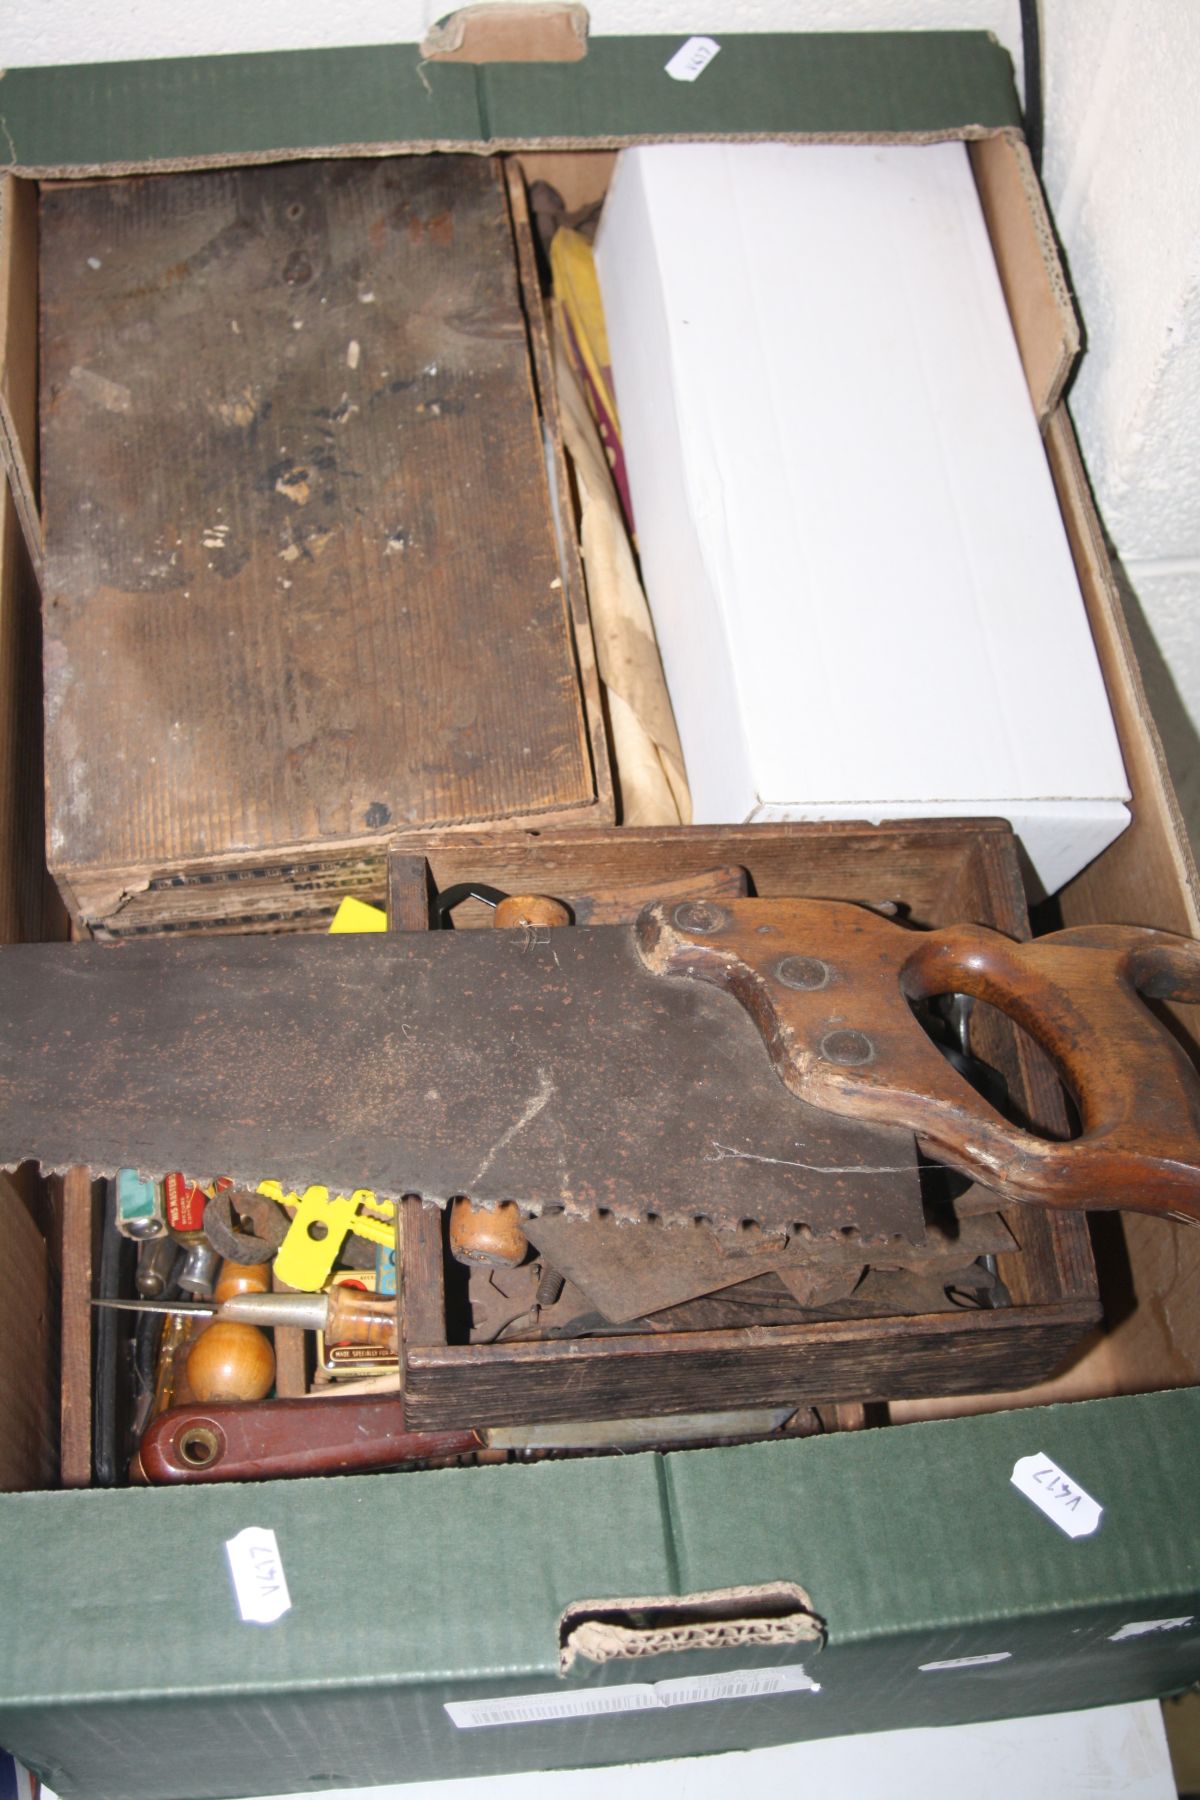 FIVE BOXES OF VARIOUS HAND TOOLS, to include planes, saws, hand sythes, files, chizels, hammers, - Image 14 of 14